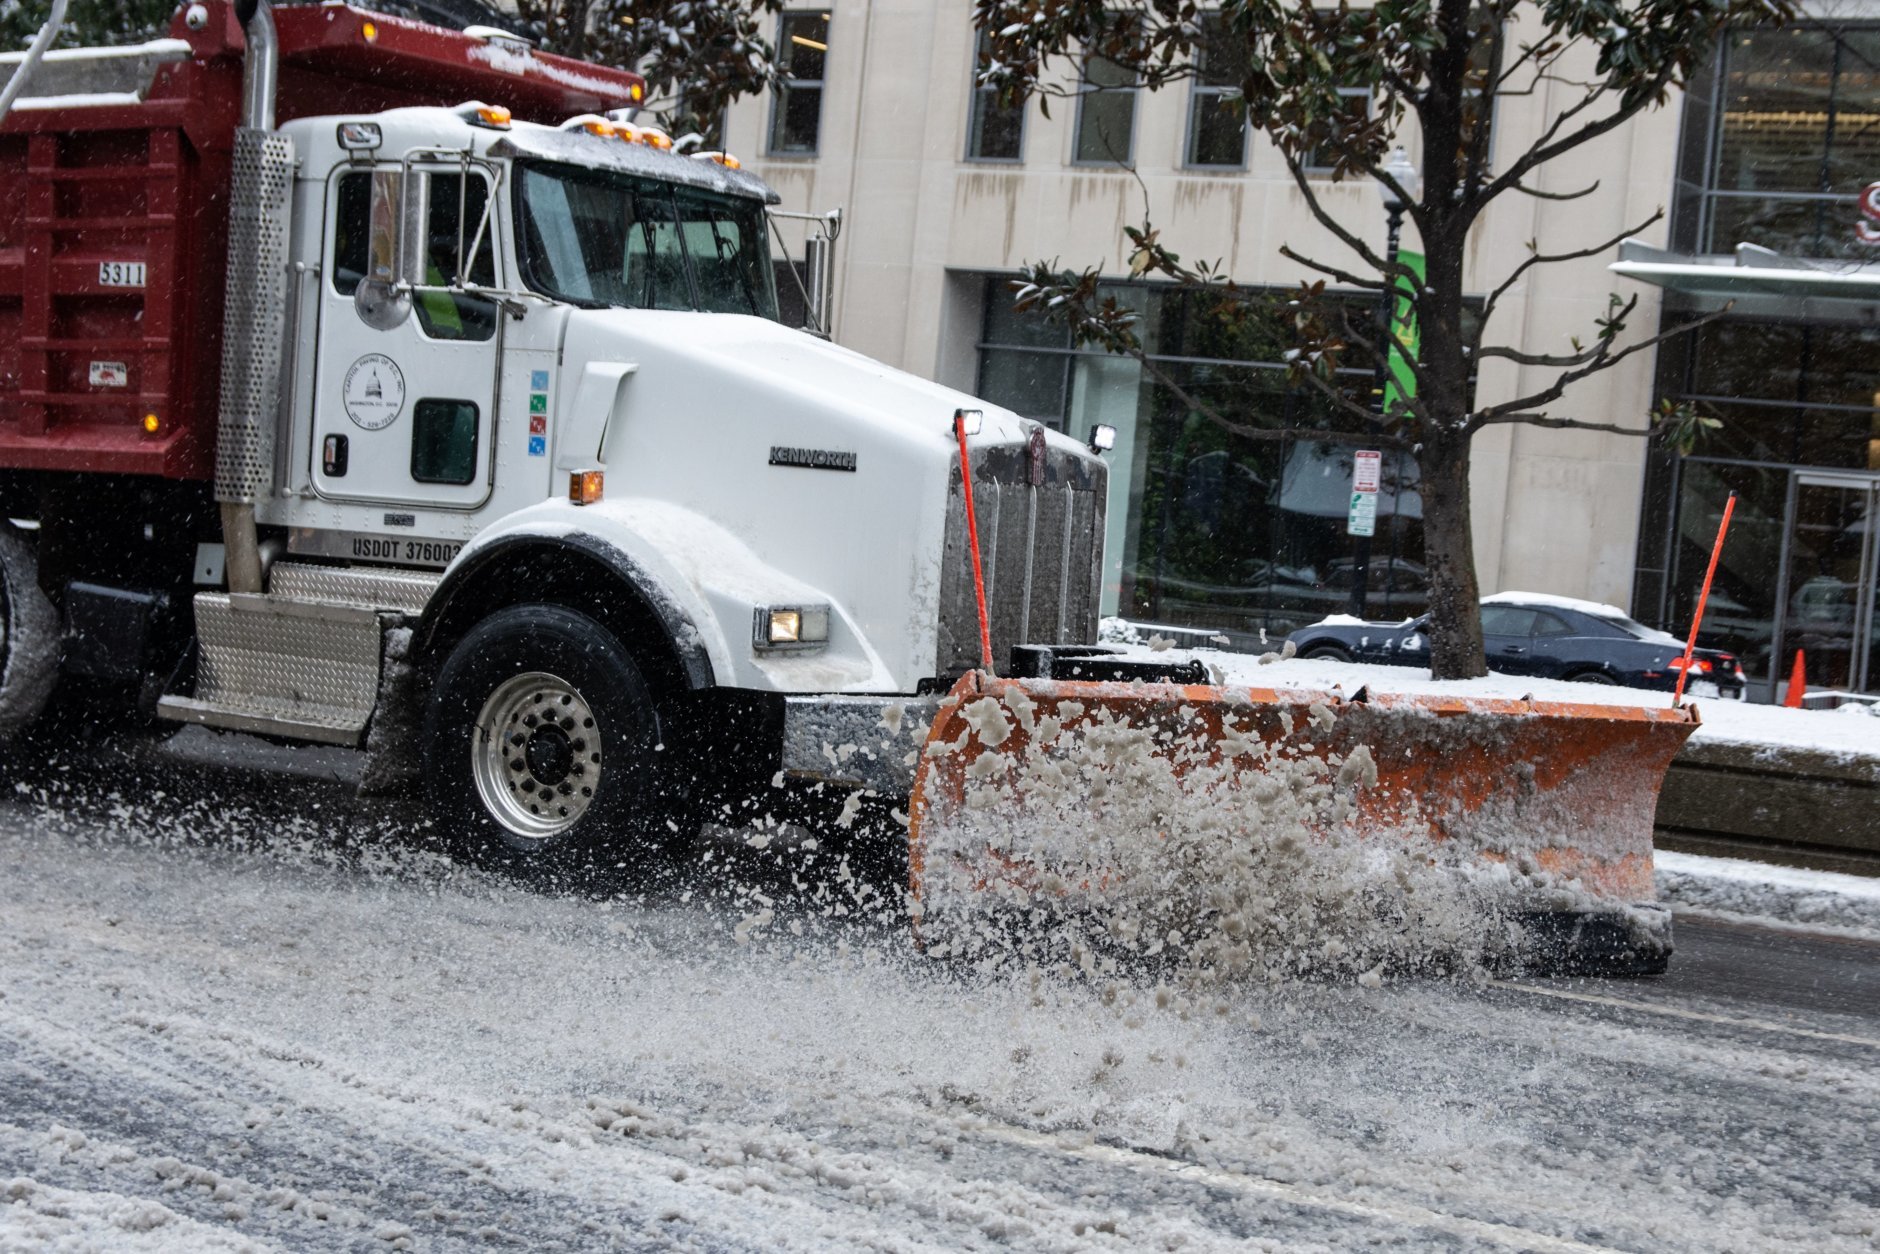 A snow plow clears slush off Connecticut Avenue on Wednesday afternoon. (WTOP/Alejandro Alvarez)